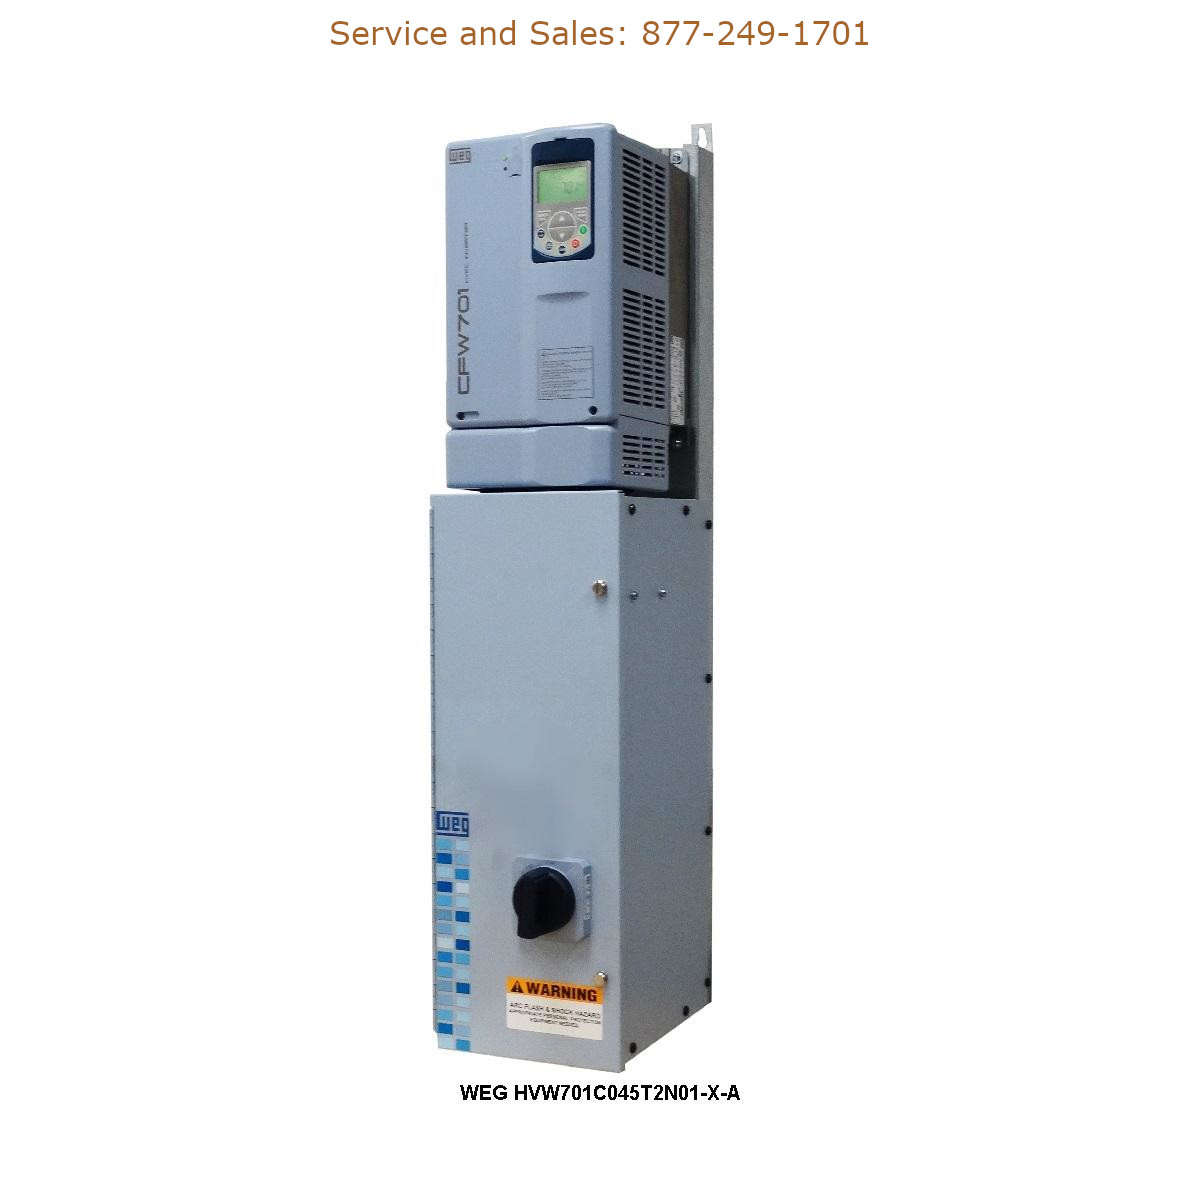 WEG HVW701C045T2N01-X-A WEG Model Number HVW701C045T2N01-X-A WEG Drives, Variable Speed Drives Repair Service, Troubleshooting, Replacement Parts https://gesrepair.com/wp-content/uploads/2022/WEG/WEG_HVW701C045T2N01-X-A_Drives_Variable_Speed_Drives.jpg